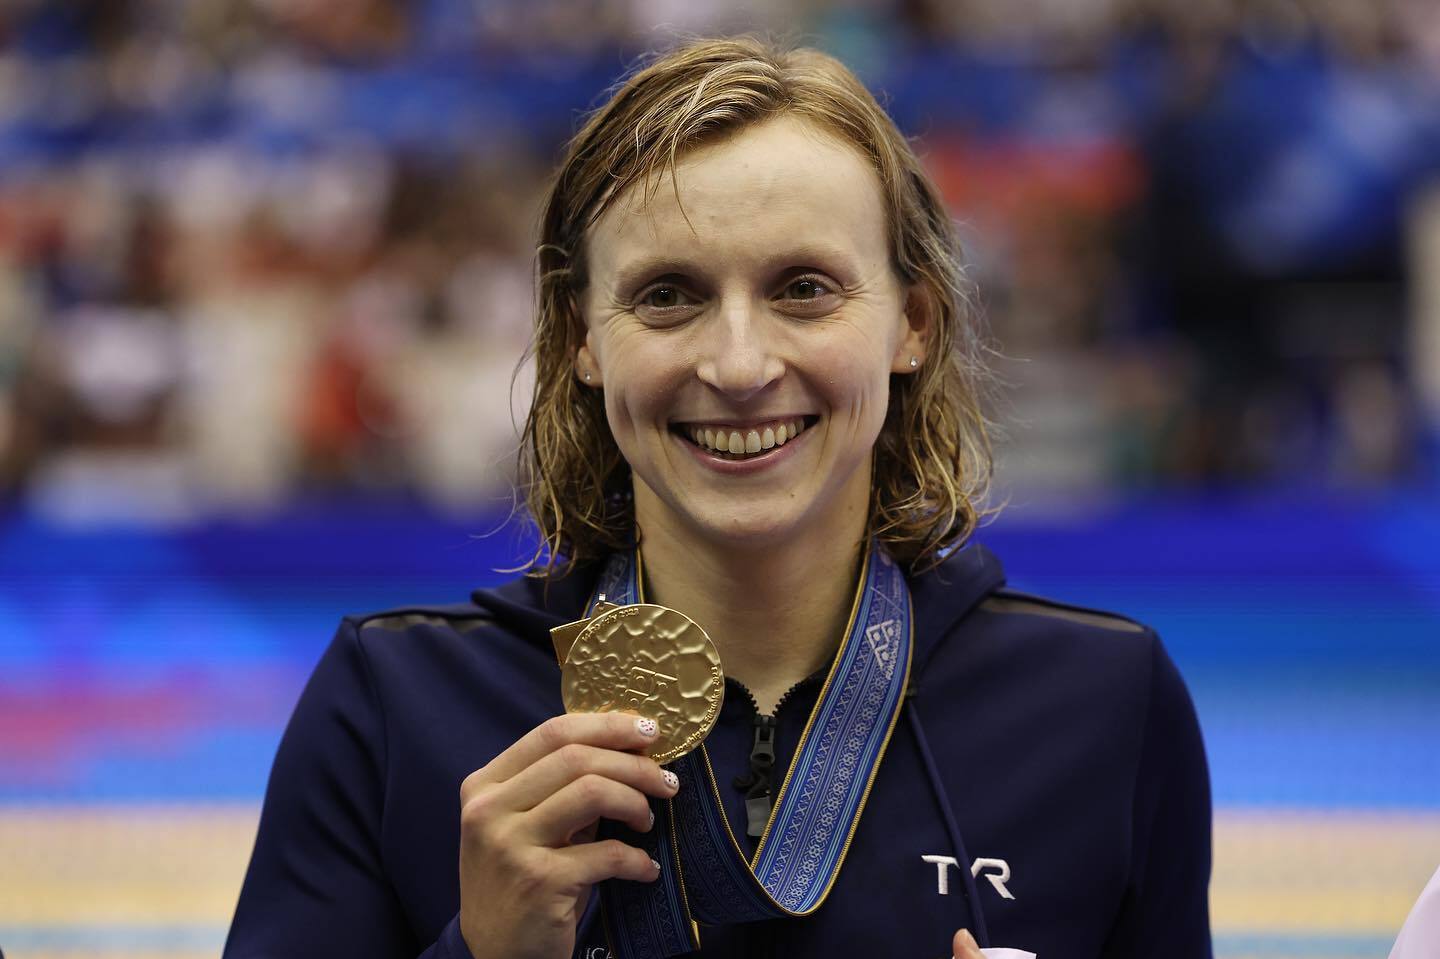 5 Fun Facts About Katie Ledecky